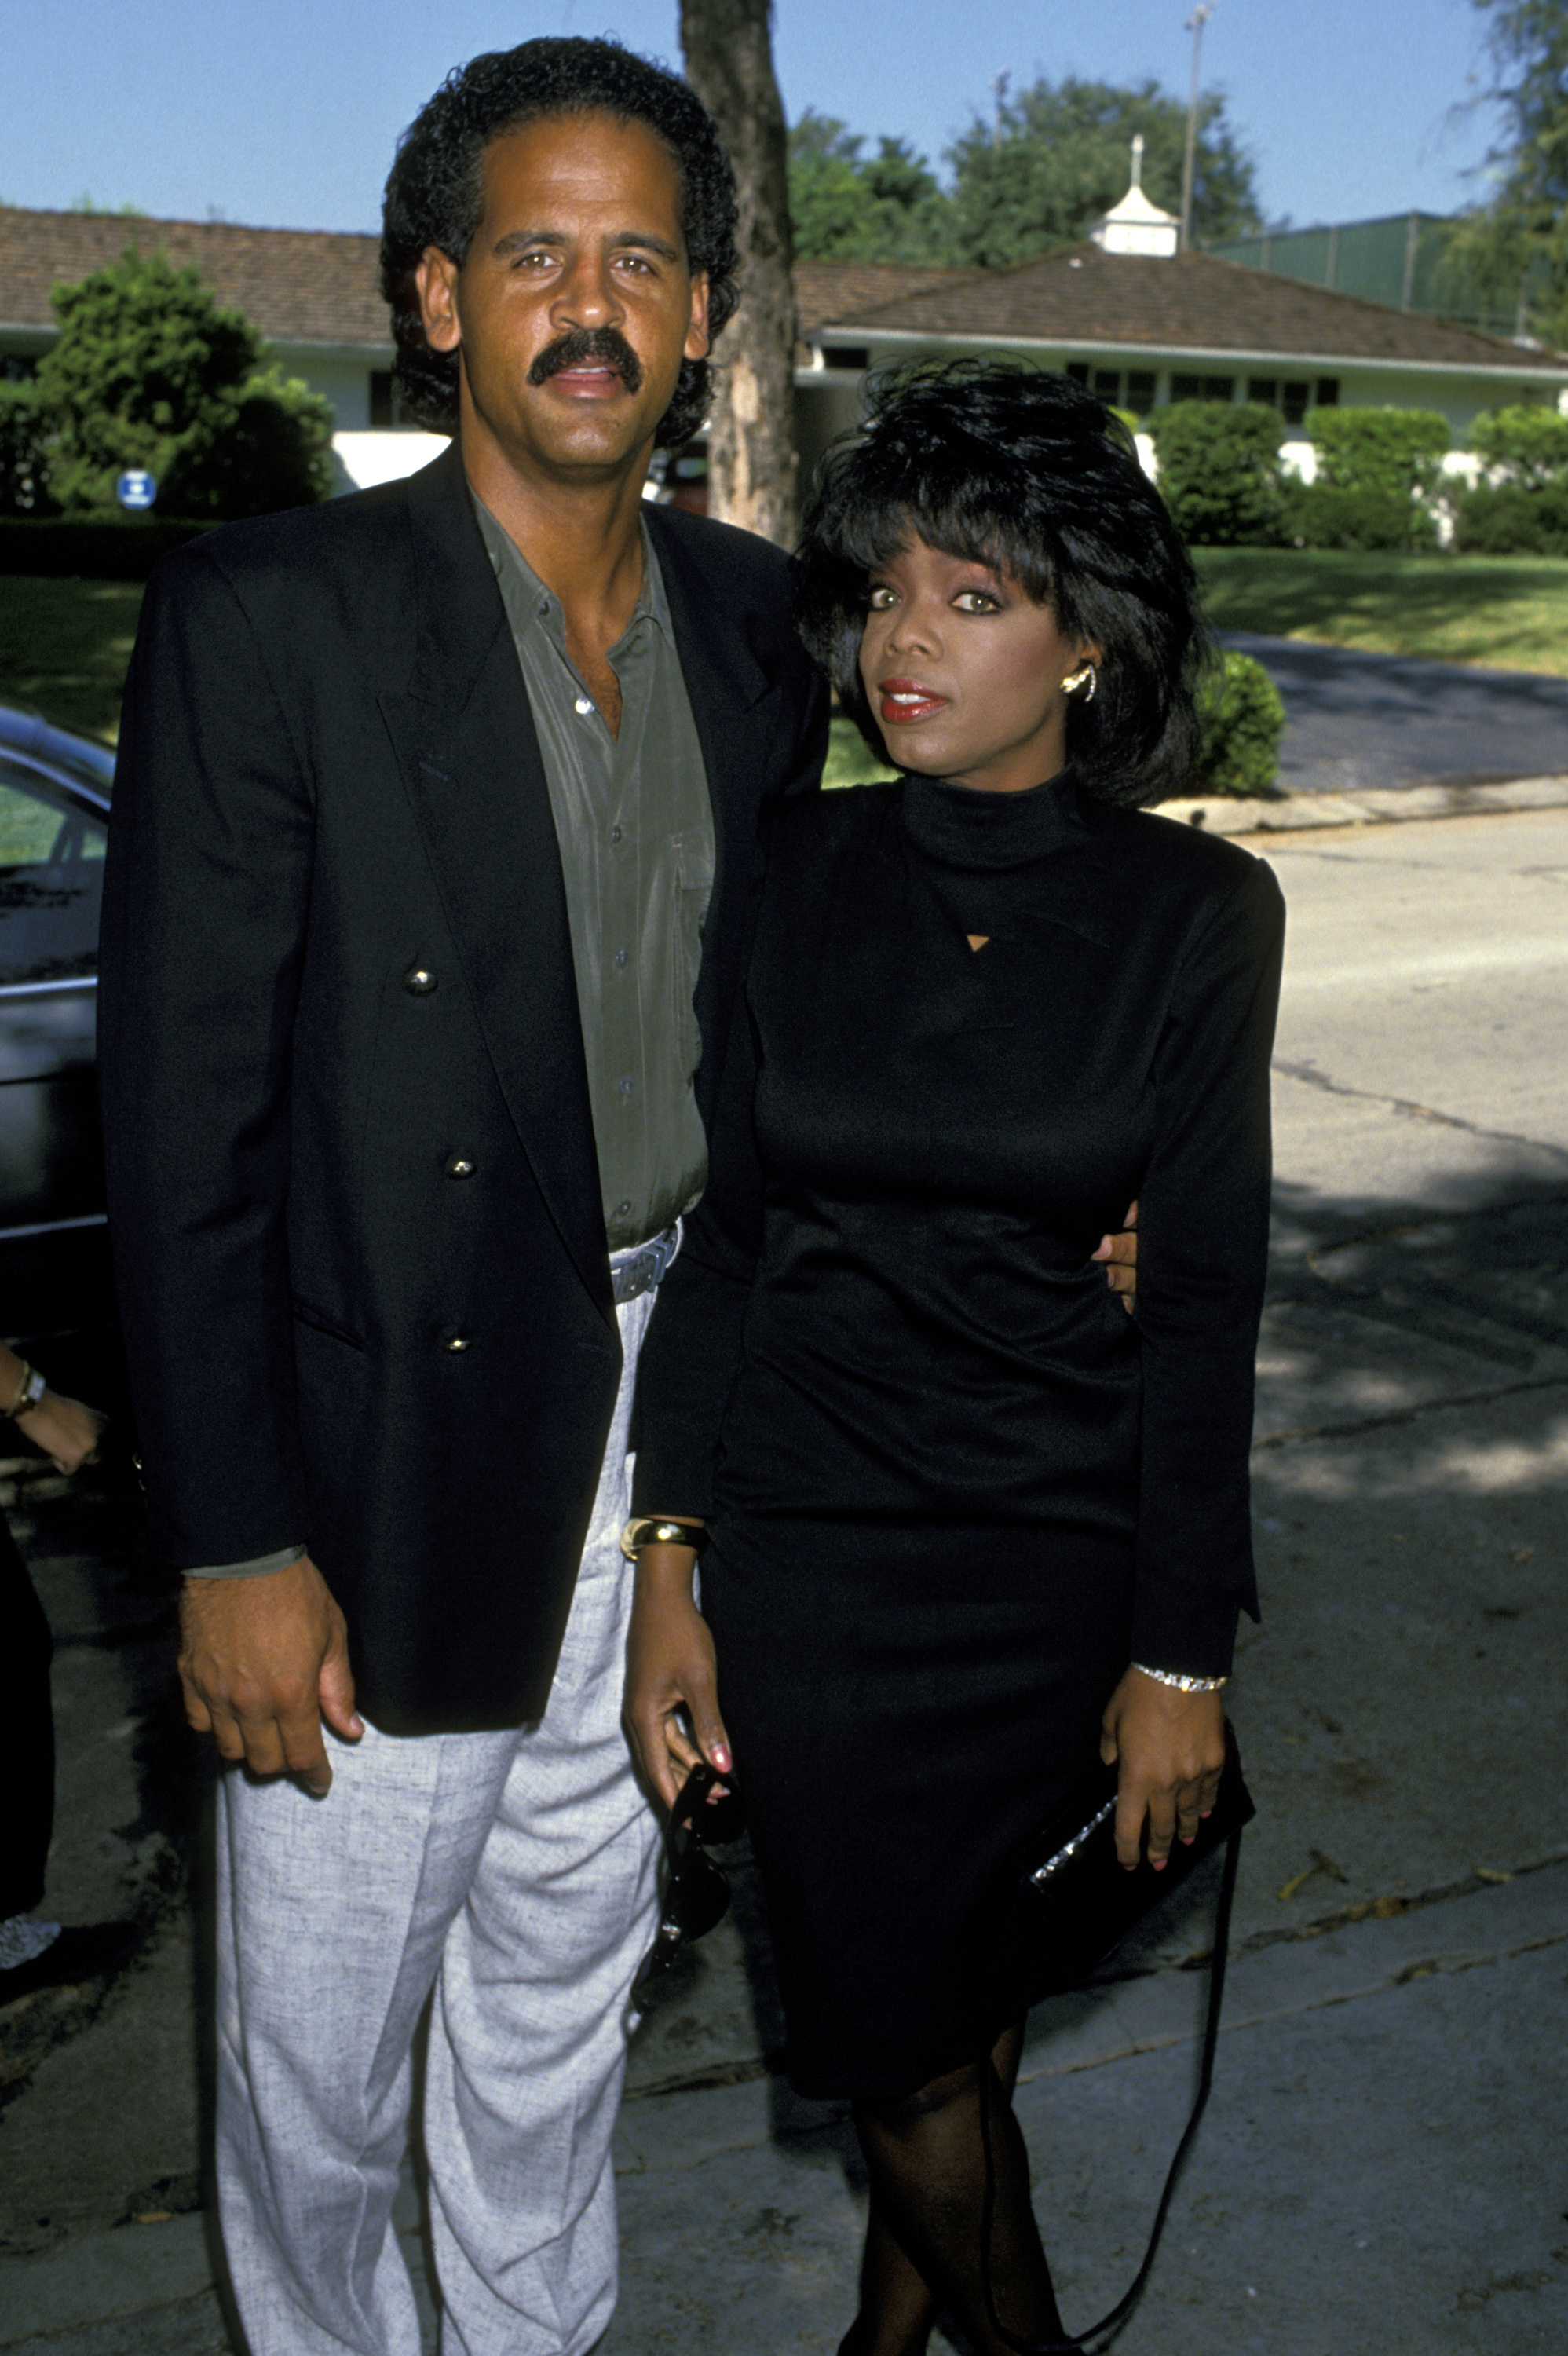 Stedman Graham and Oprah Winfrey in Holmby Hills, California on September 24, 1989 | Source: Getty Images